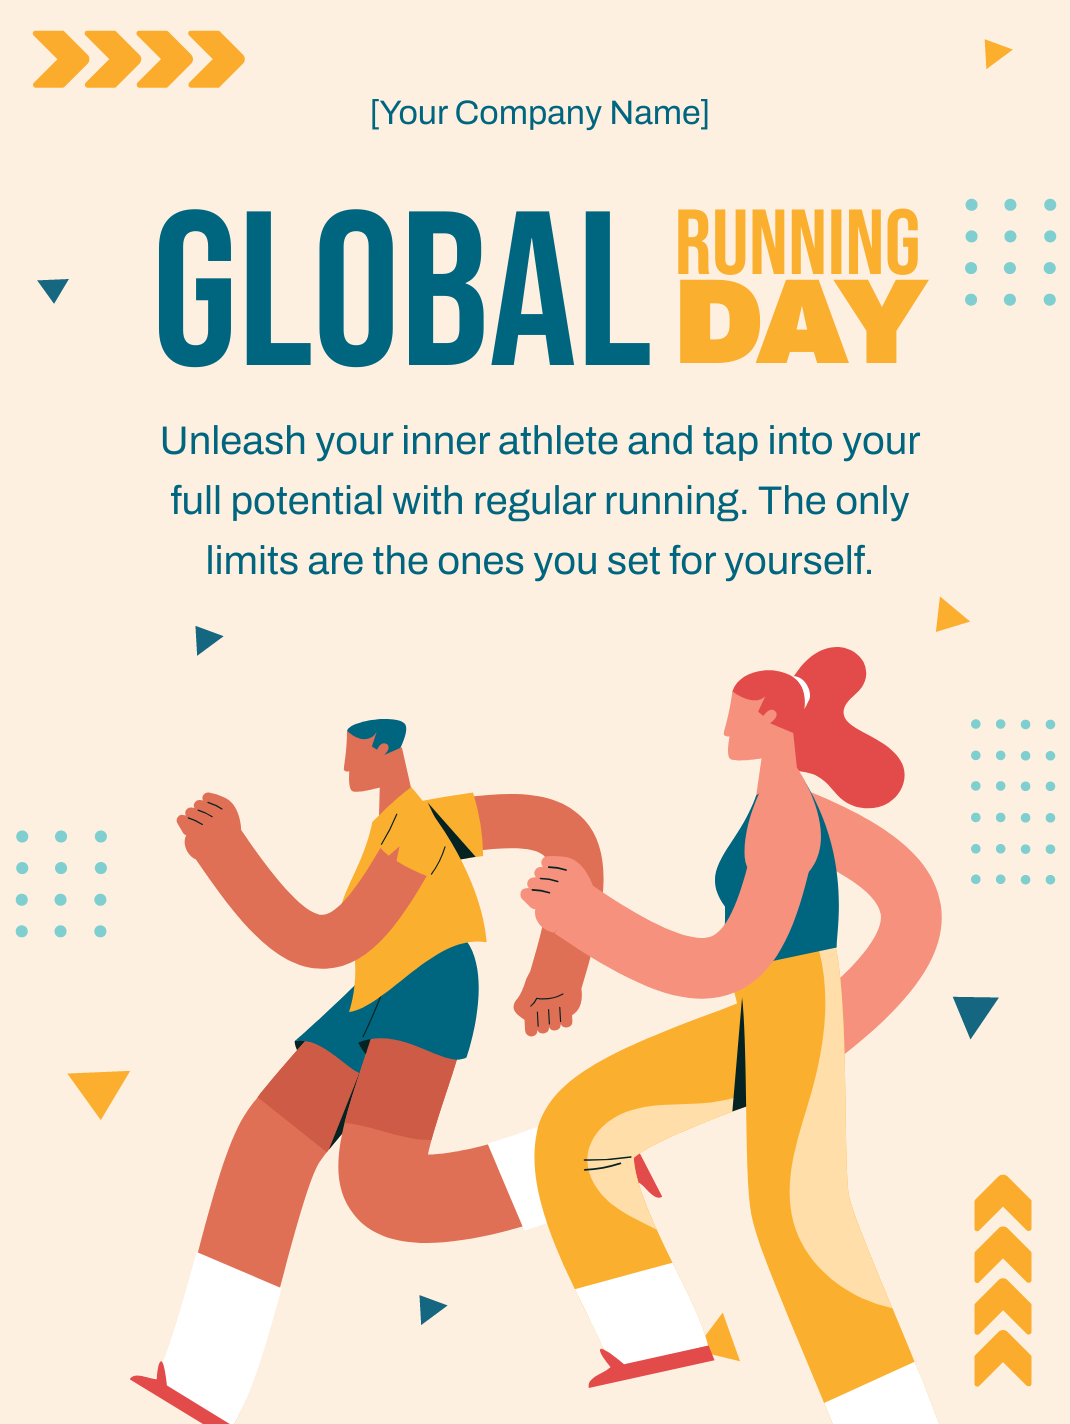 Global Running Day Threads Post